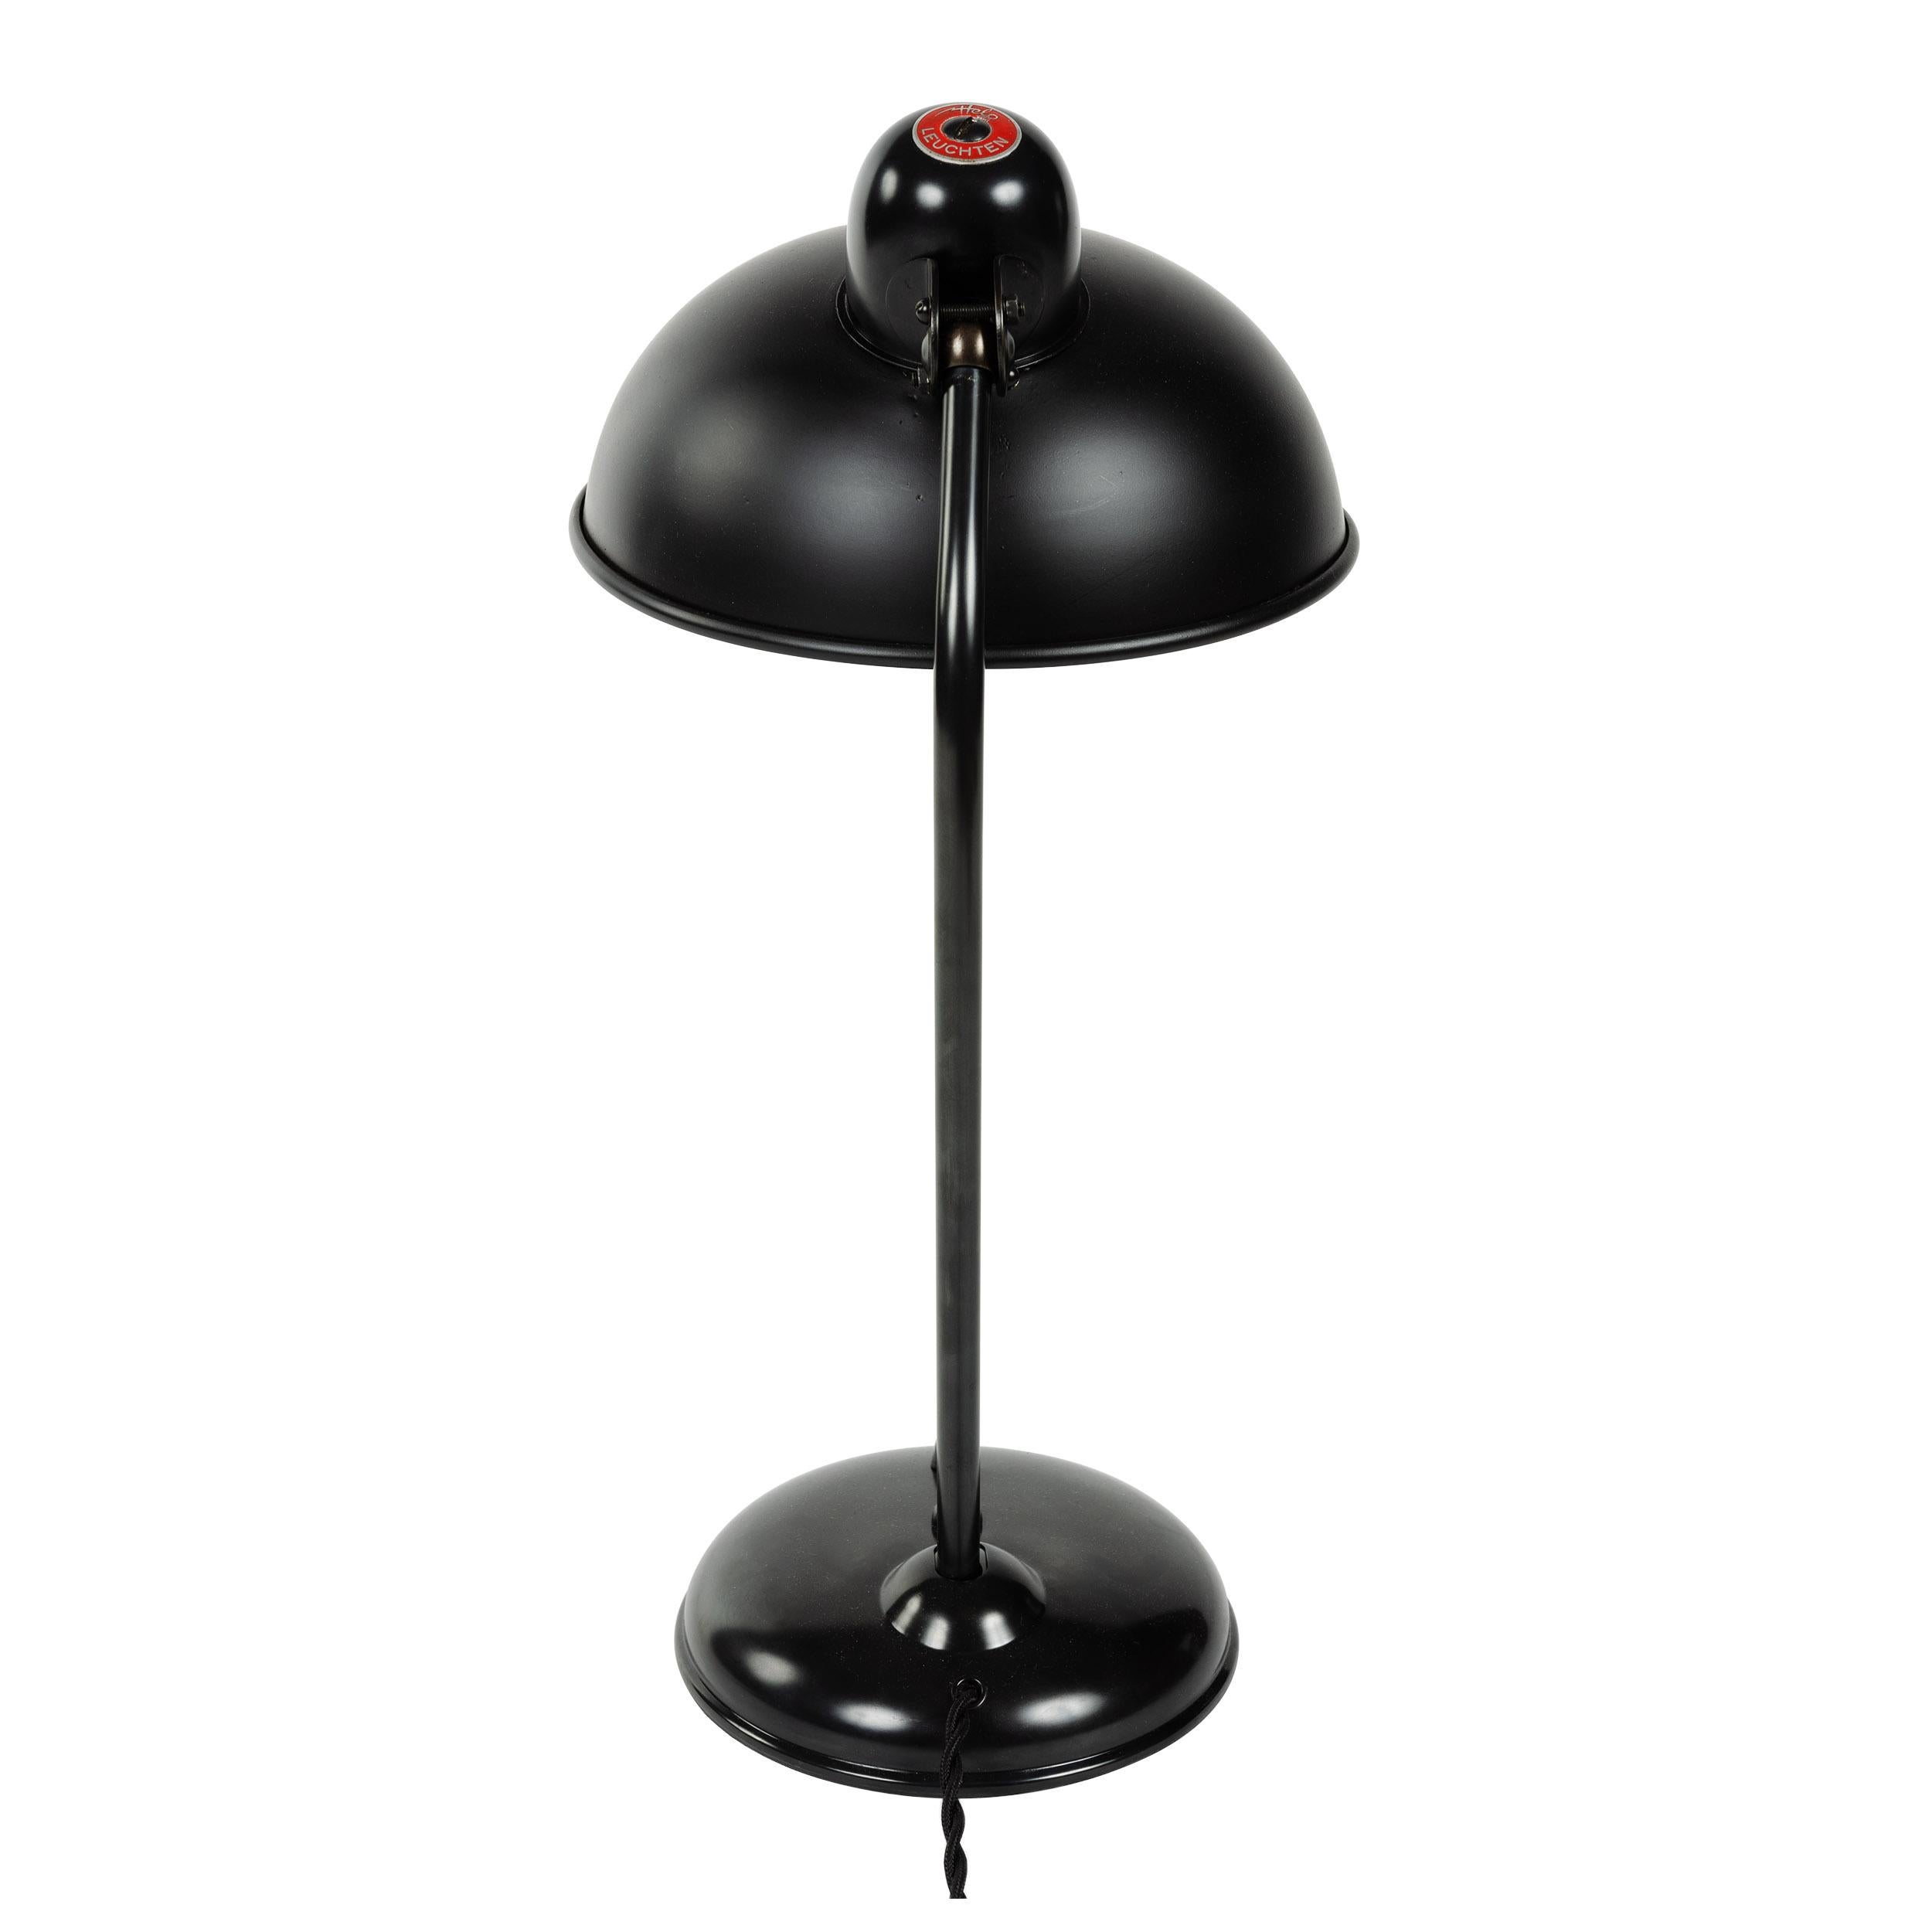 A black patinated desk or table lamp with two adjustable pivot points by Bauhaus designer Christian Dell. Manufactured by Helo Leuchten in the 1930s -1940s.